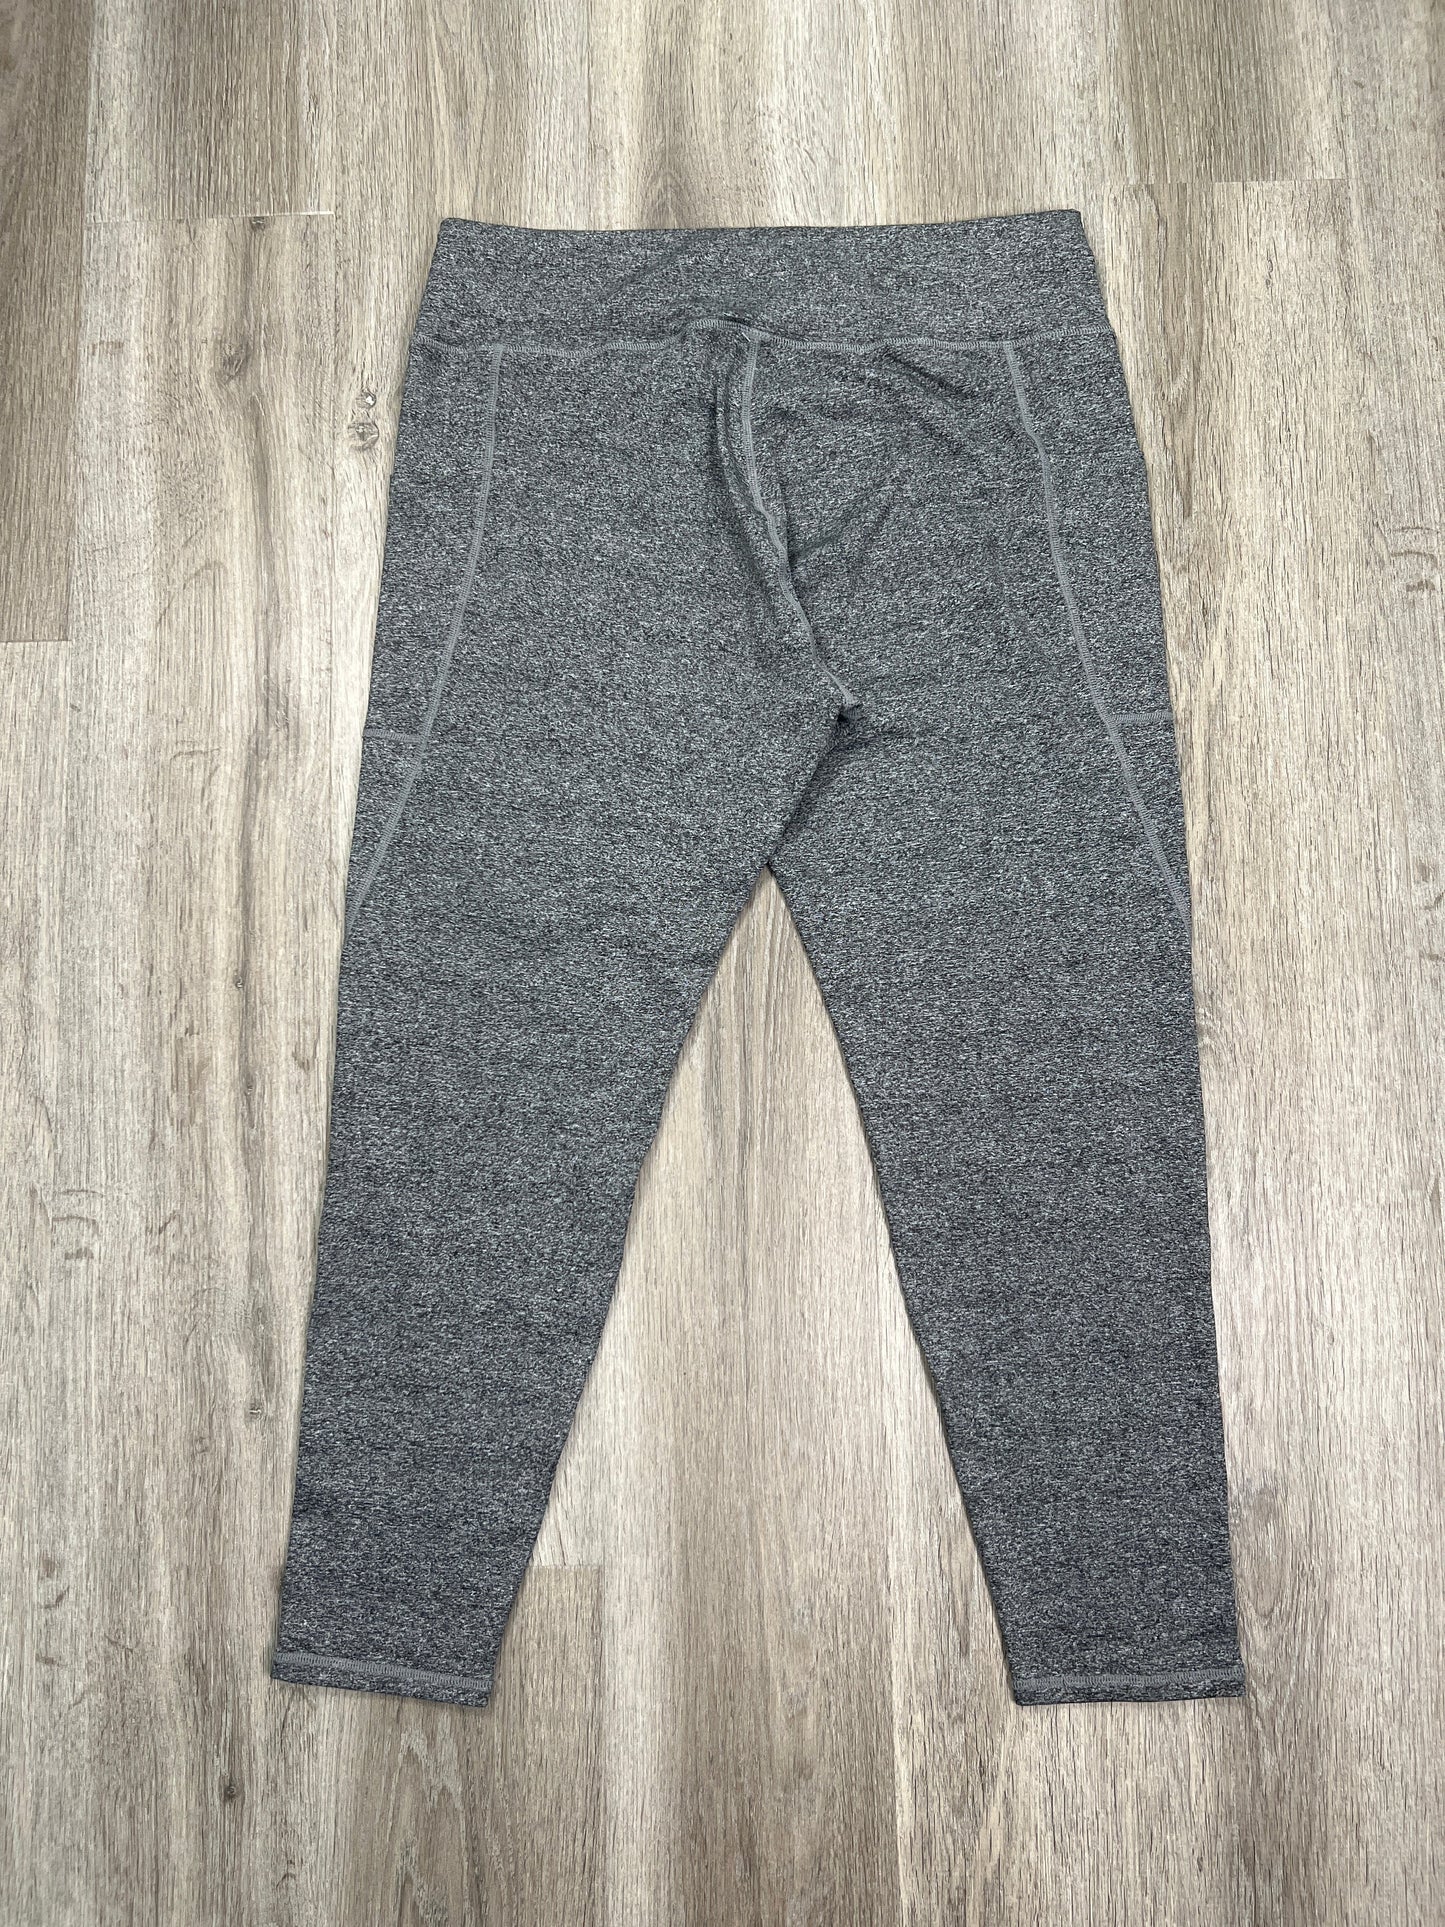 Athletic Leggings By Clothes Mentor  Size: 3x